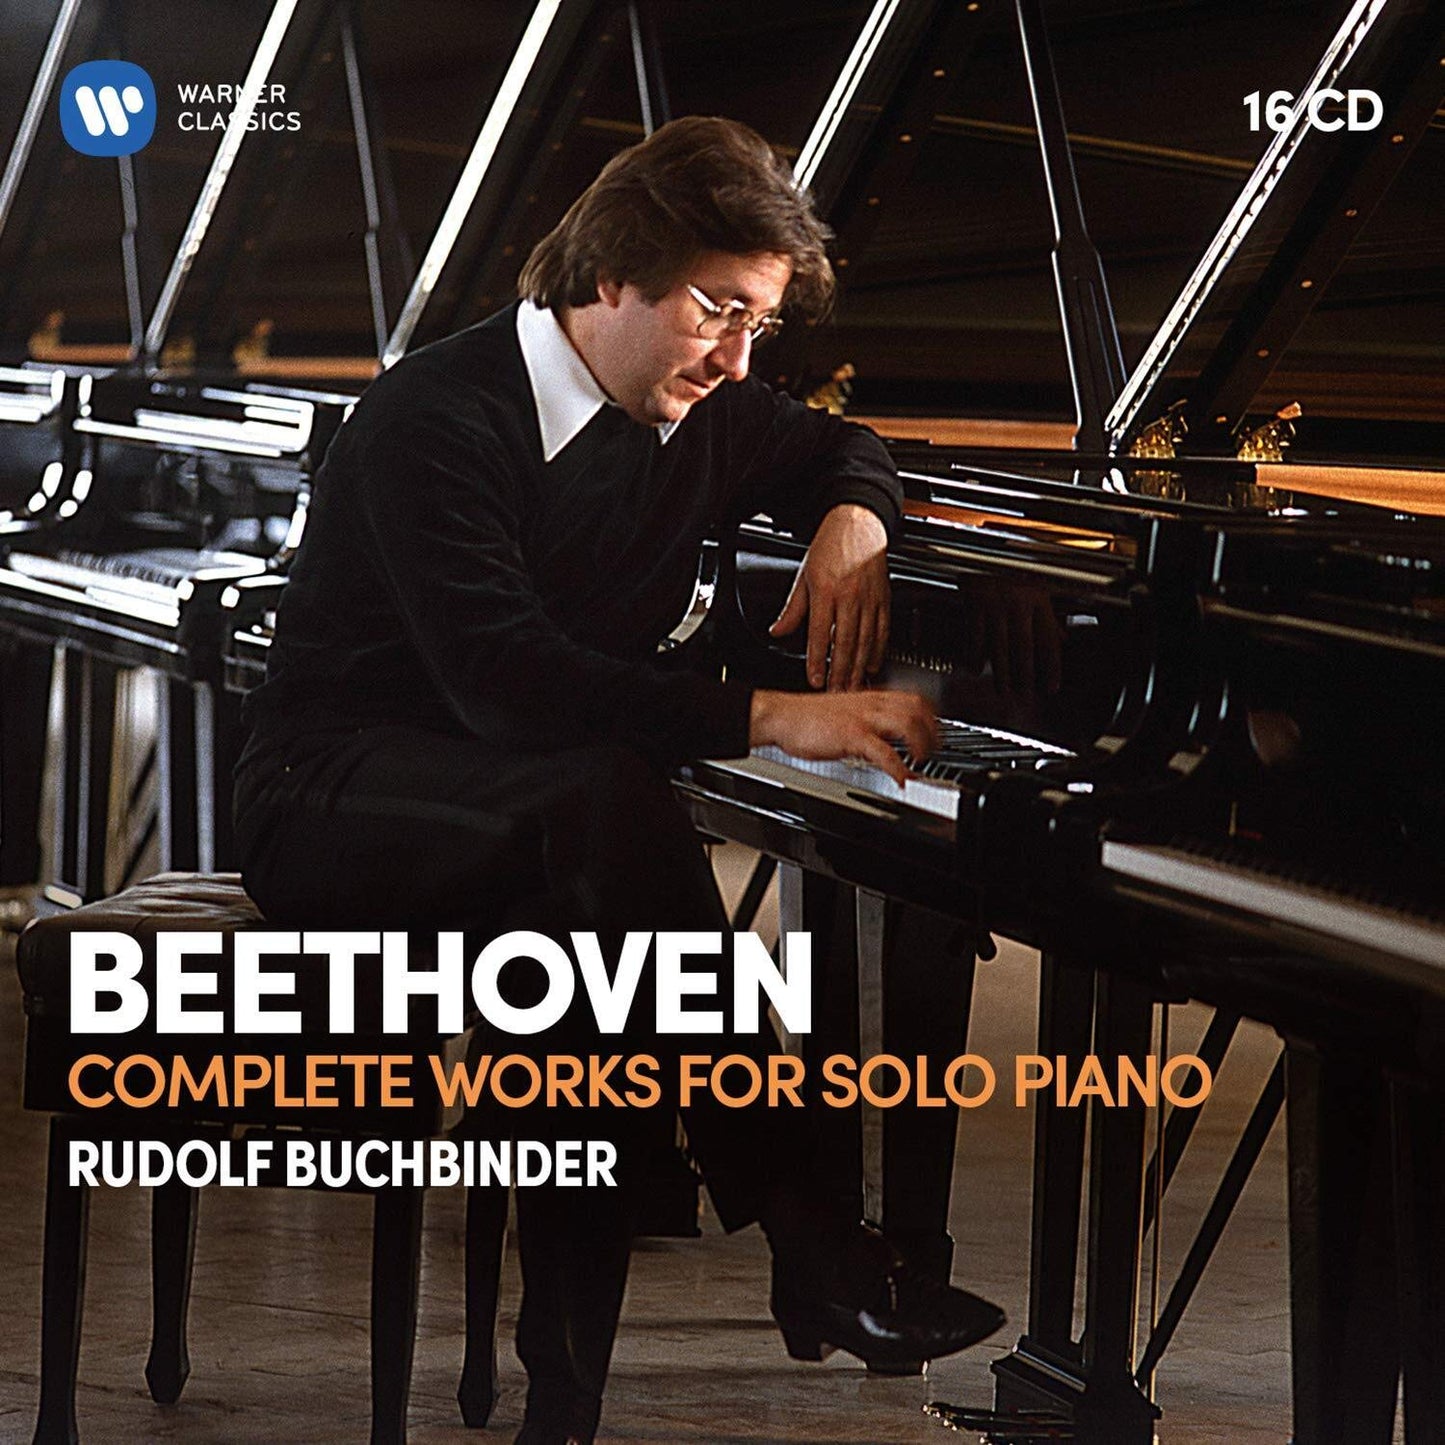 BEETHOVEN: COMPLETE WORKS FOR SOLO PIANO - RUDOLF BUCHBINDER (16 CDS)